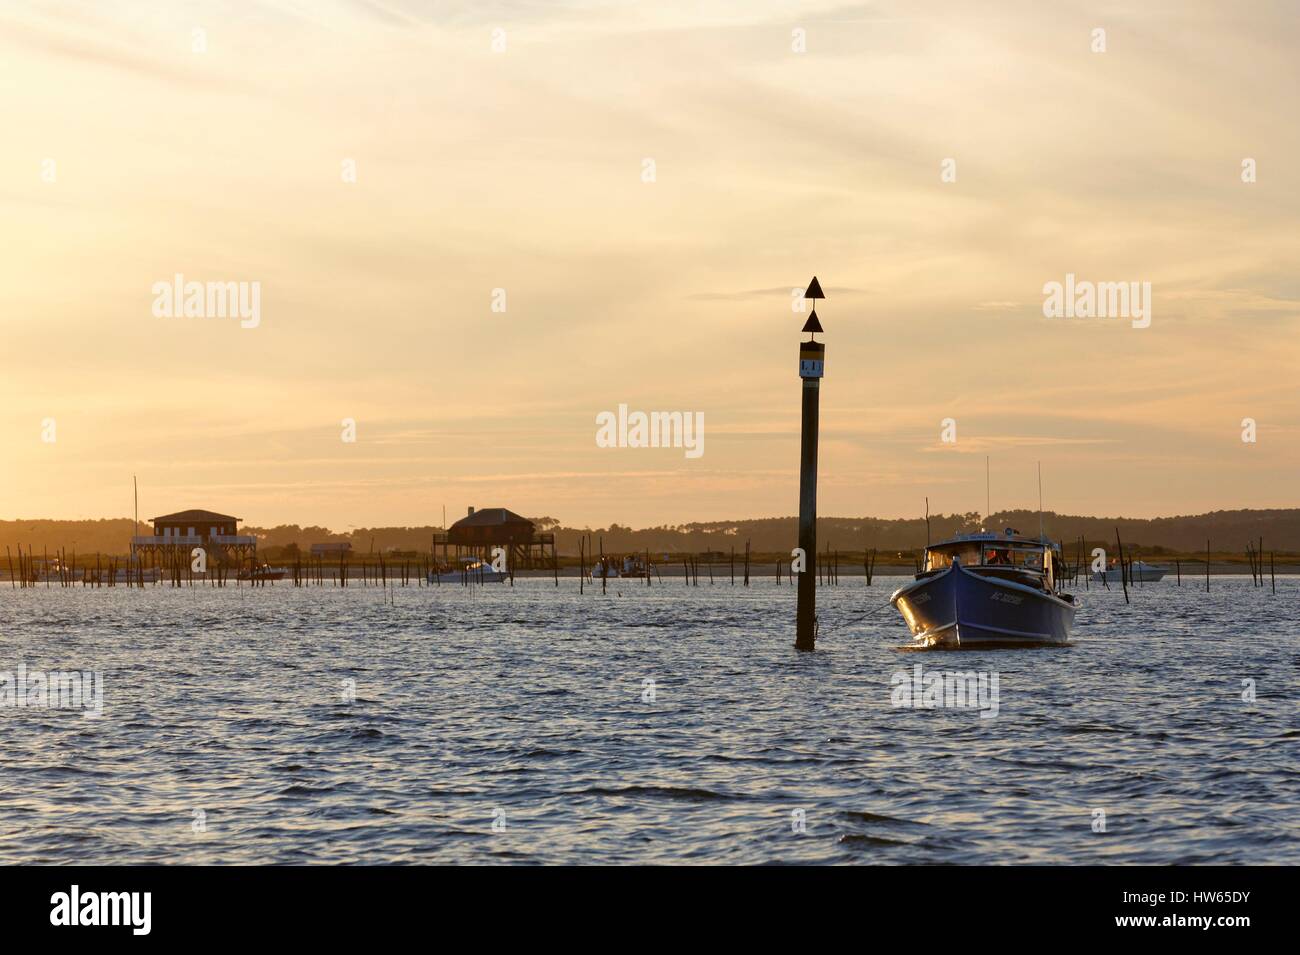 France, Gironde, Bassin d'Arcachon, ile aux oiseaux, the Cabanes Tchanquees Stock Photo